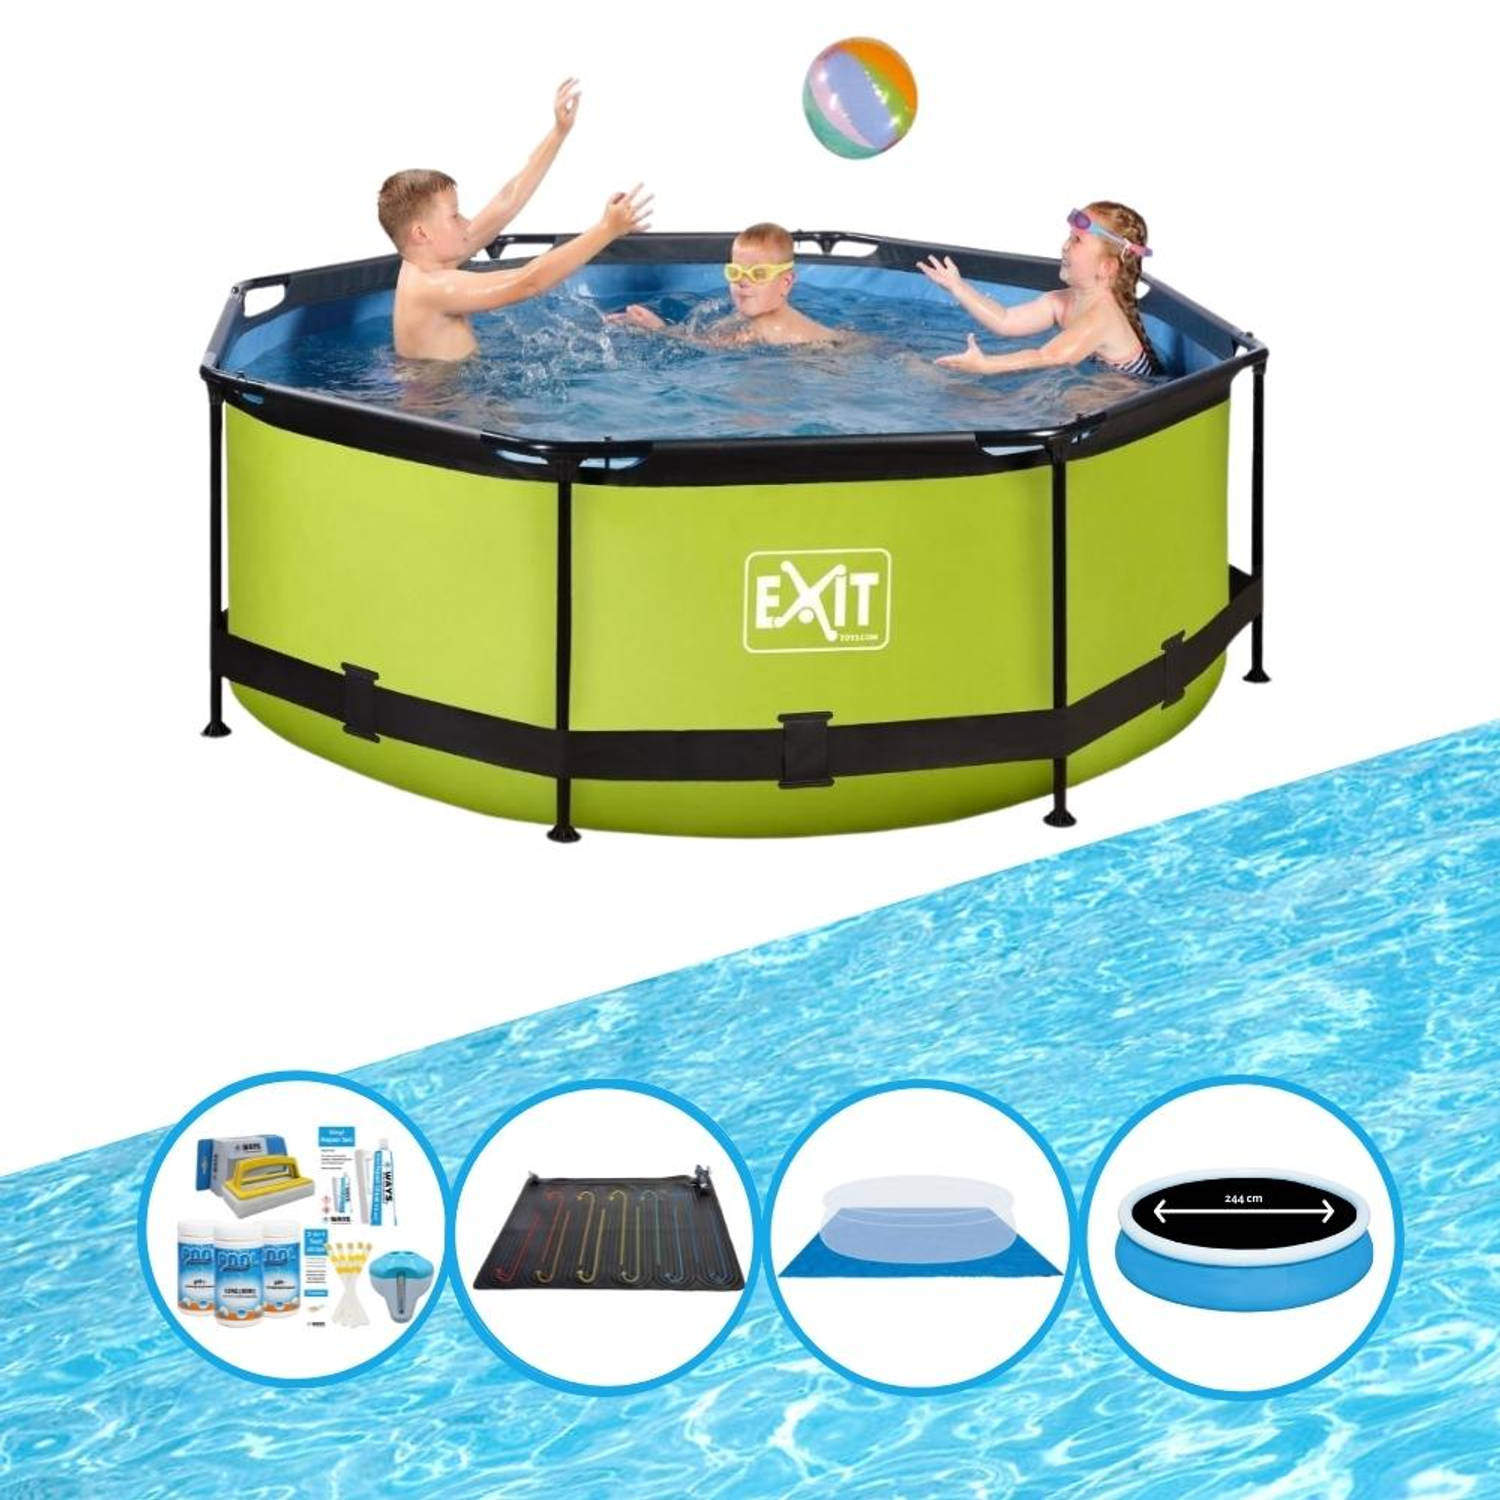 EXIT Toys Exit Zwembad Lime - Frame Pool ø244x76cm - Combi Deal - Groen